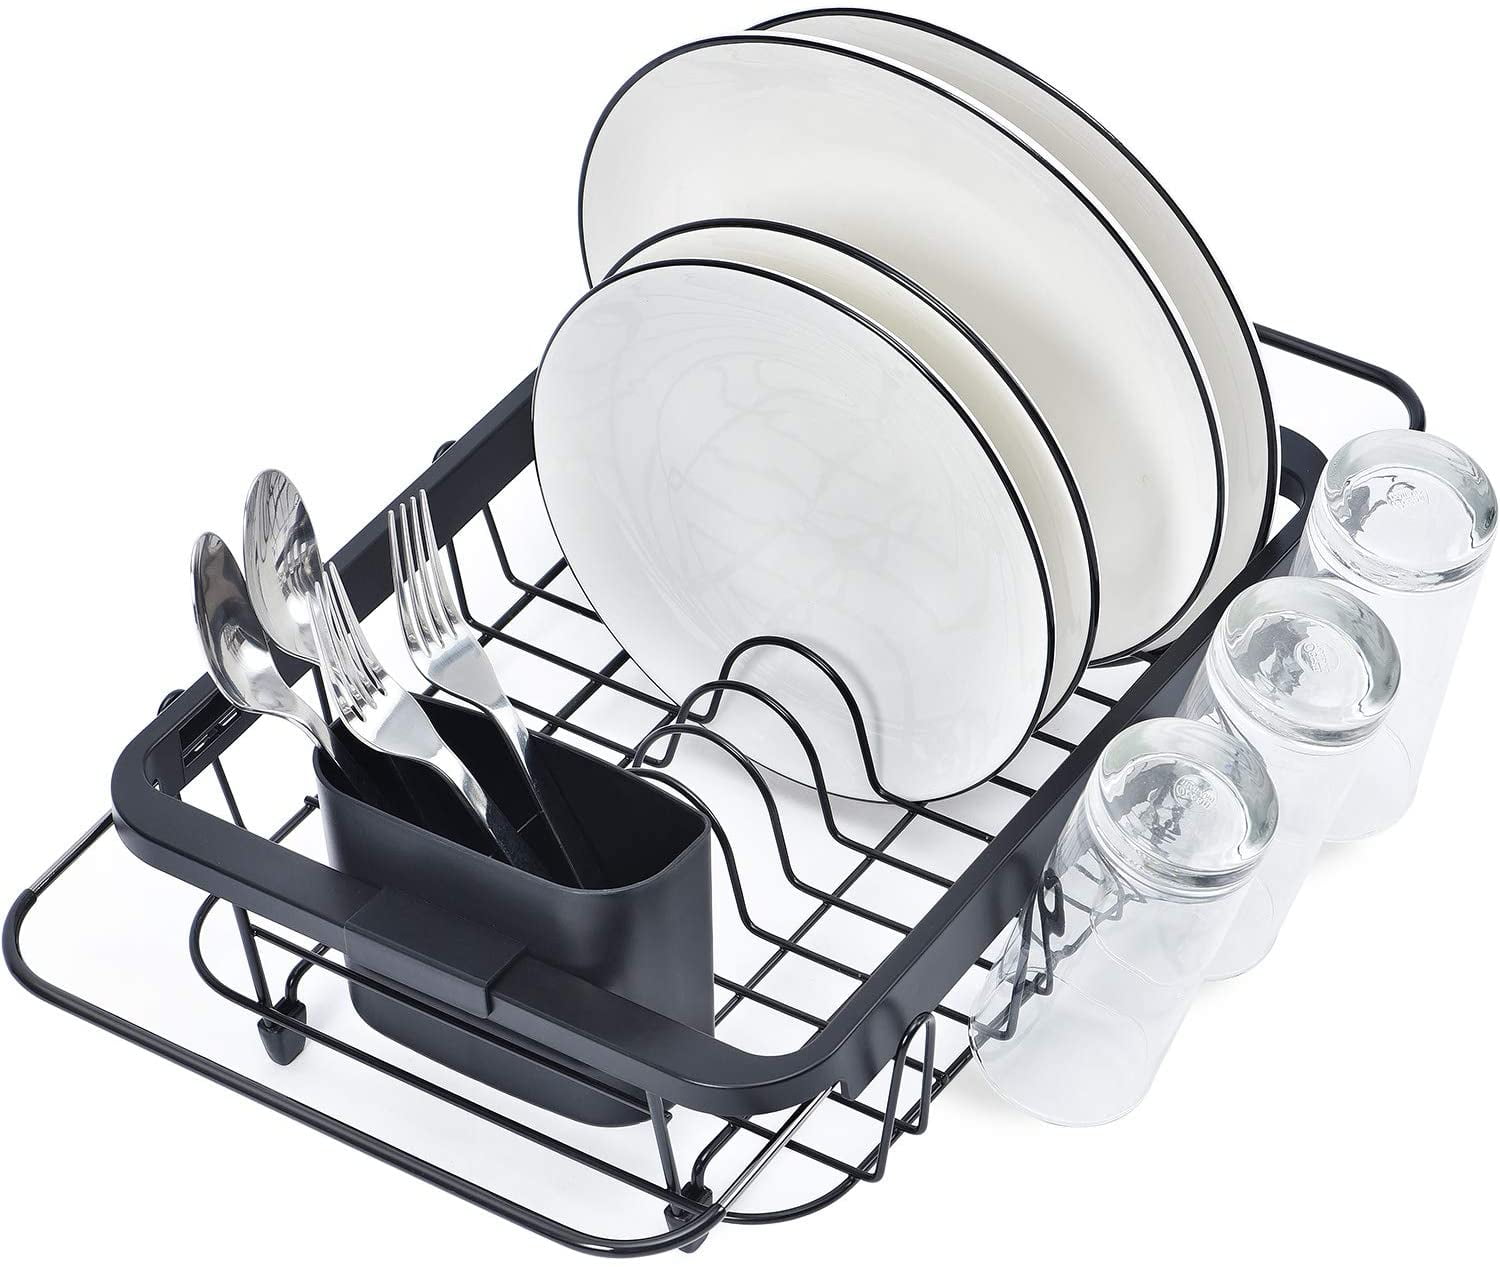 KITCHEN SINK DISH DRAINER CUTLERY PLATE CUP DRAINER HOLDER DISH RACK UK 